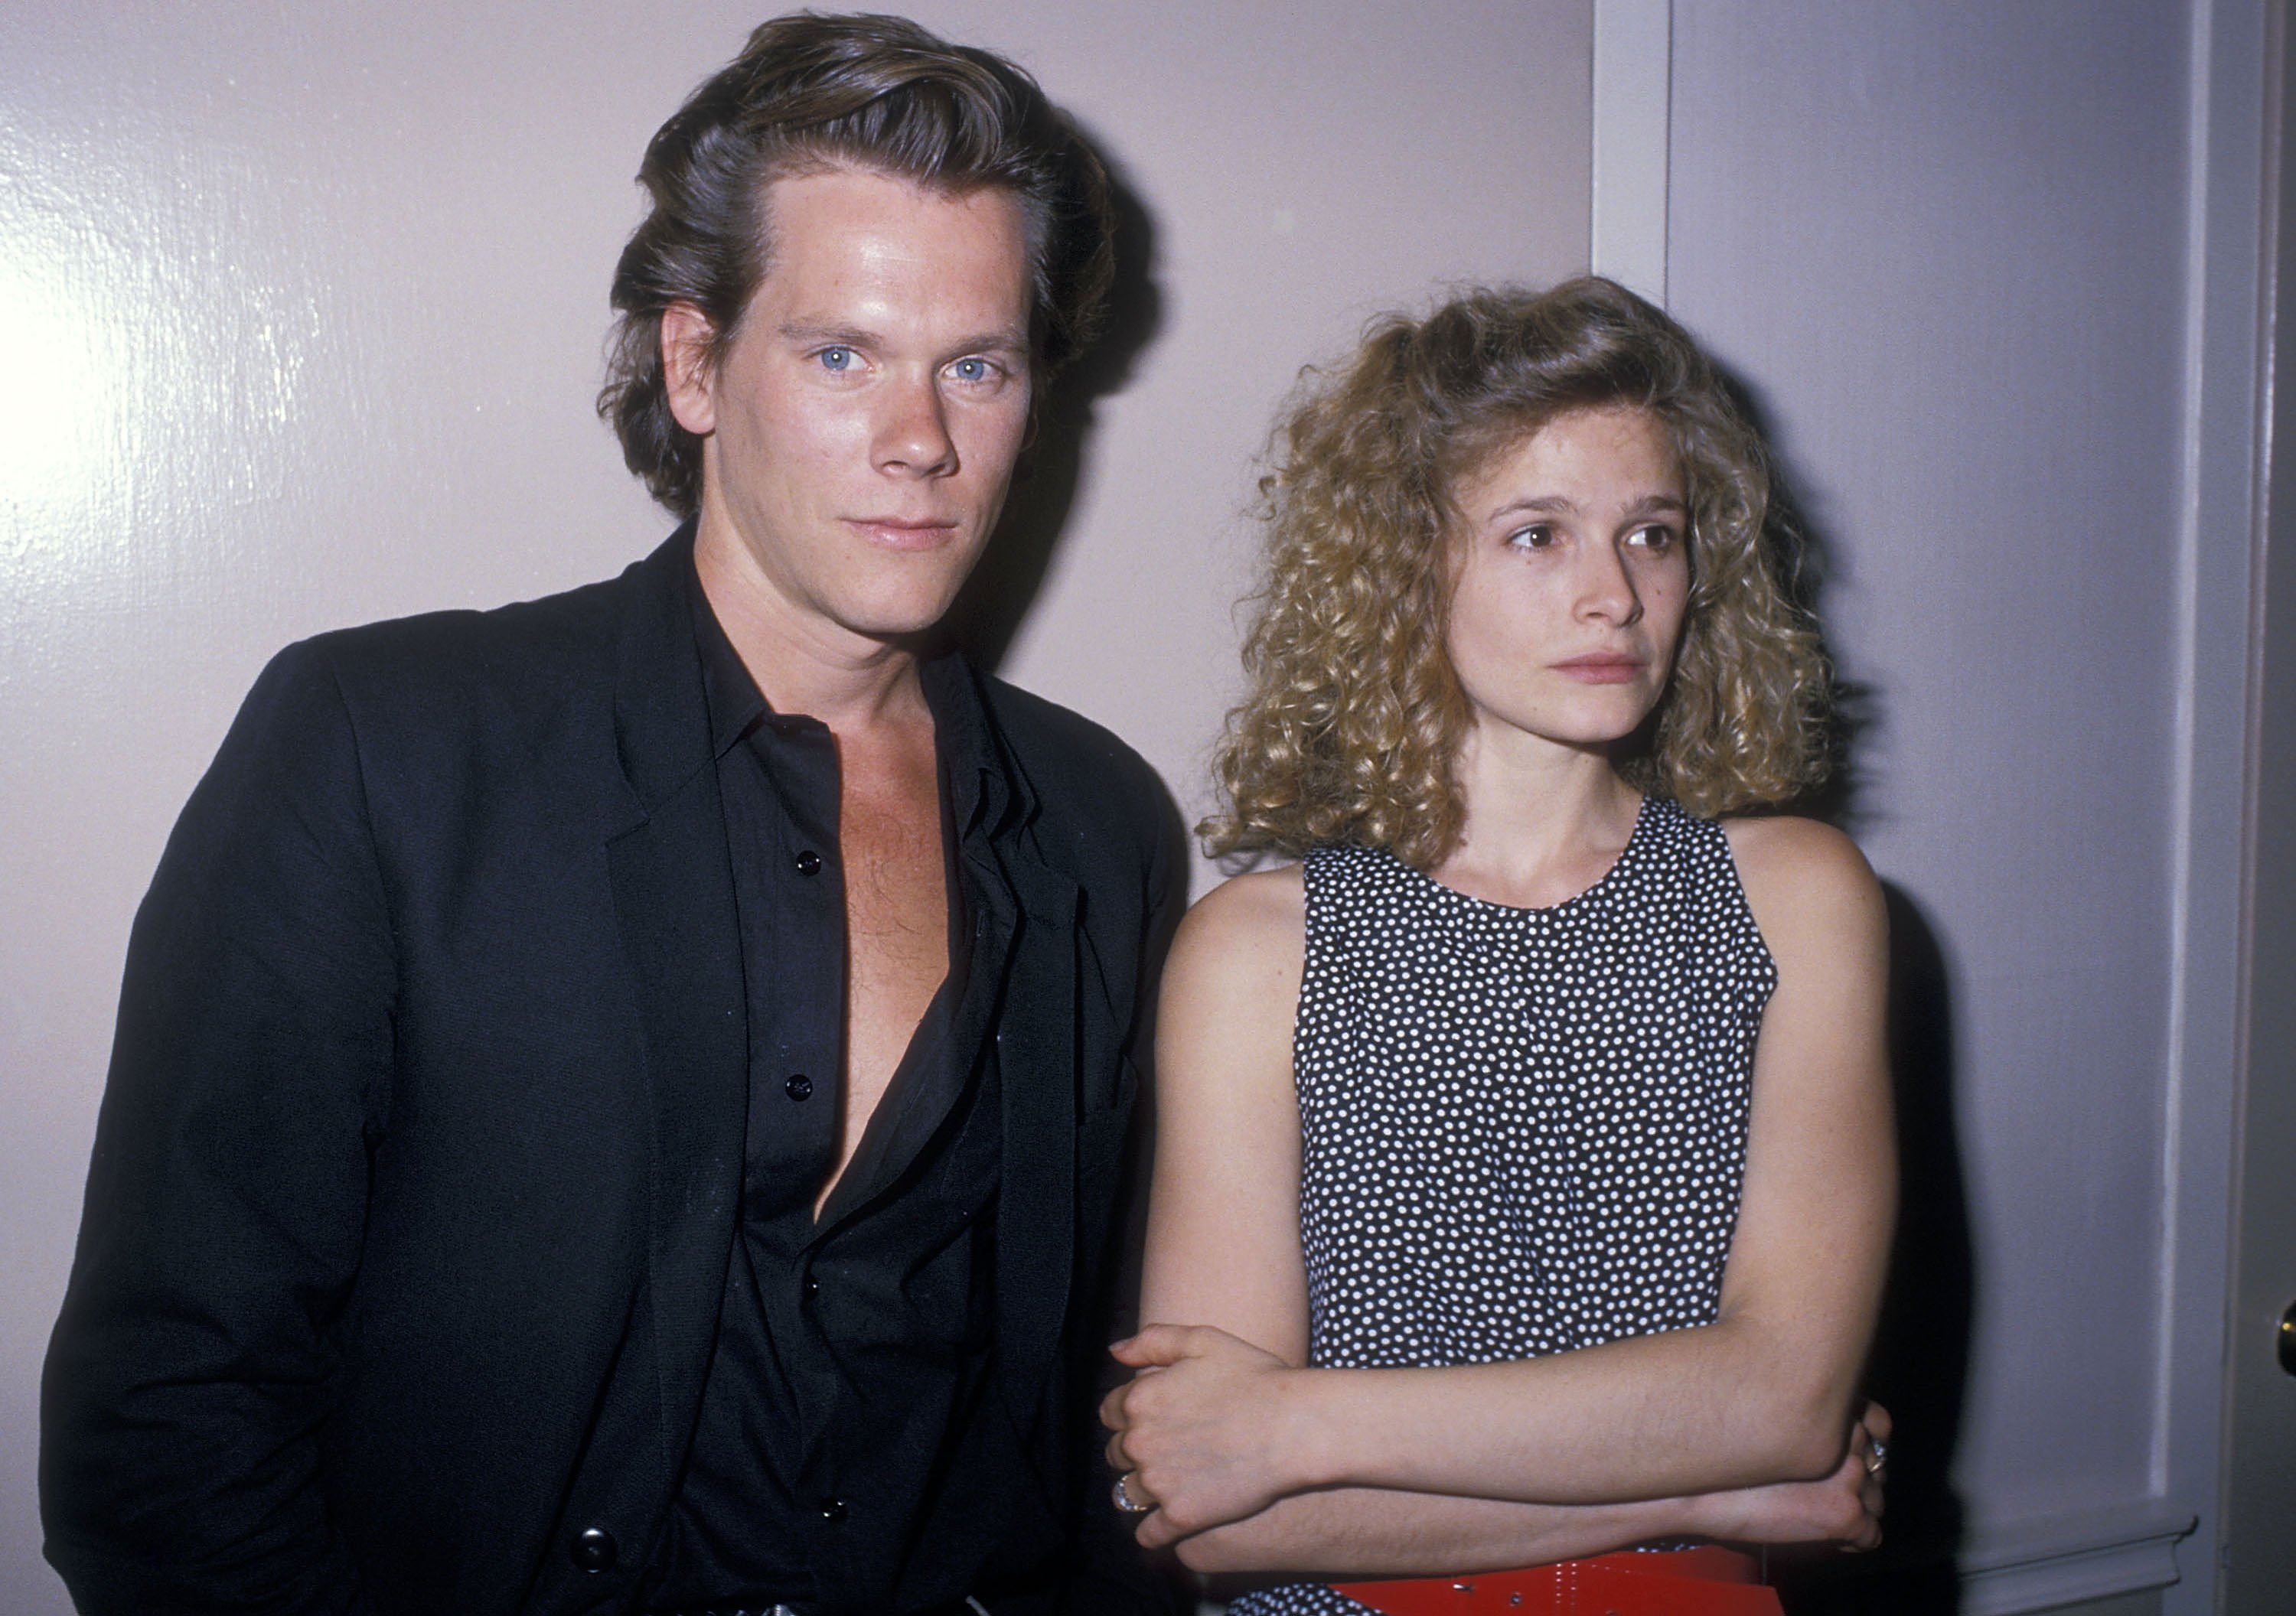 Kevin Bacon and Kyra Sedgwick | Ron Galella, Ltd./Ron Galella Collection via Getty Images